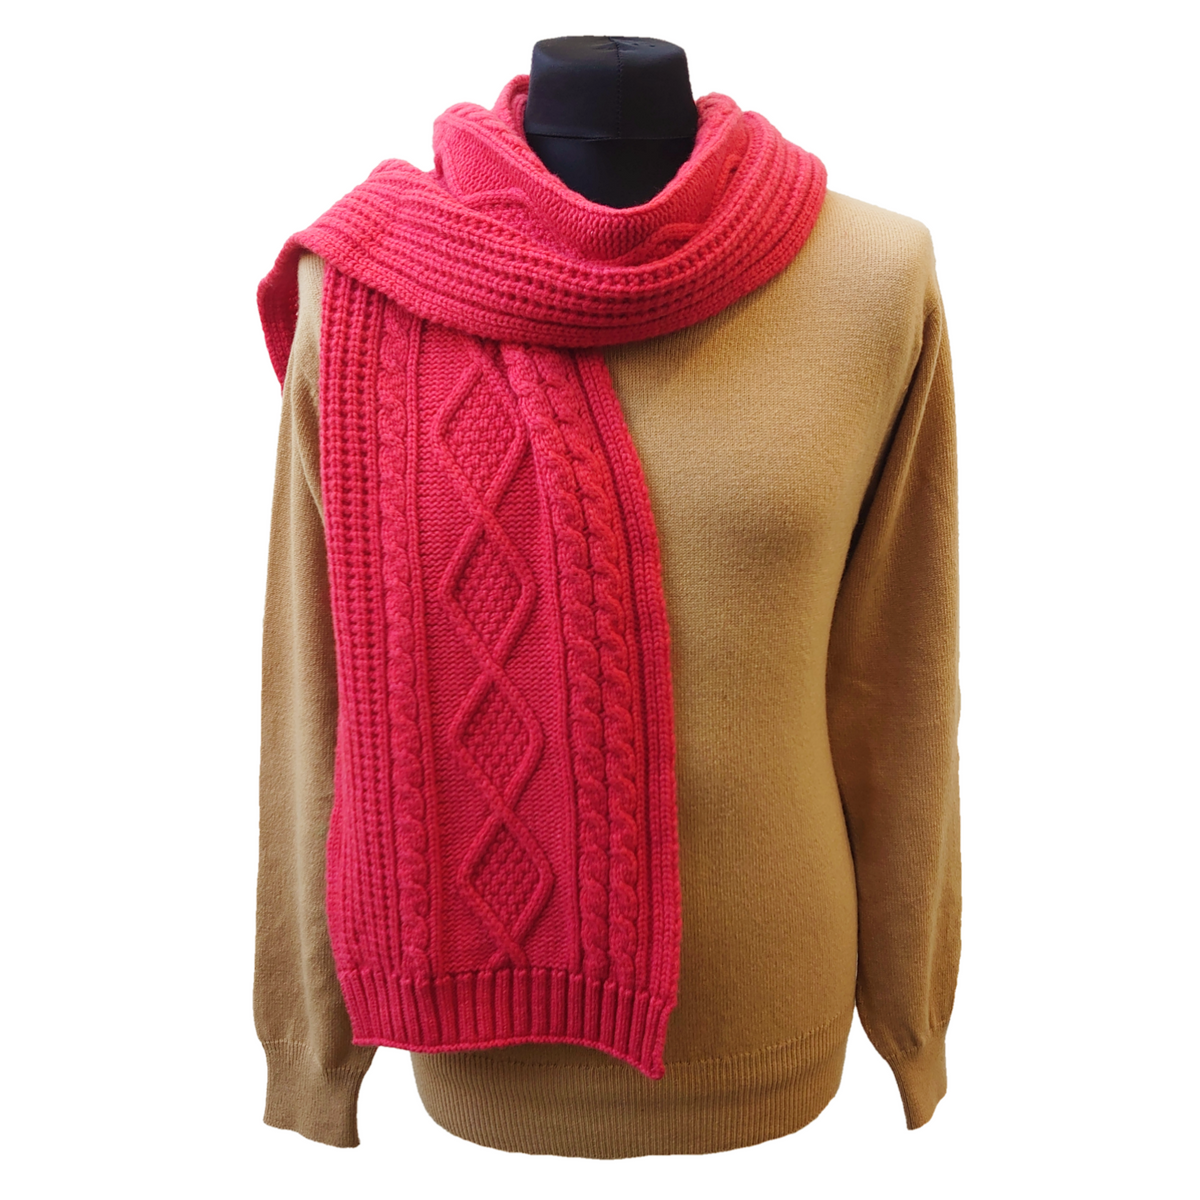 100% Pure Scottish Cashmere Cable Knit Luxury Scarf